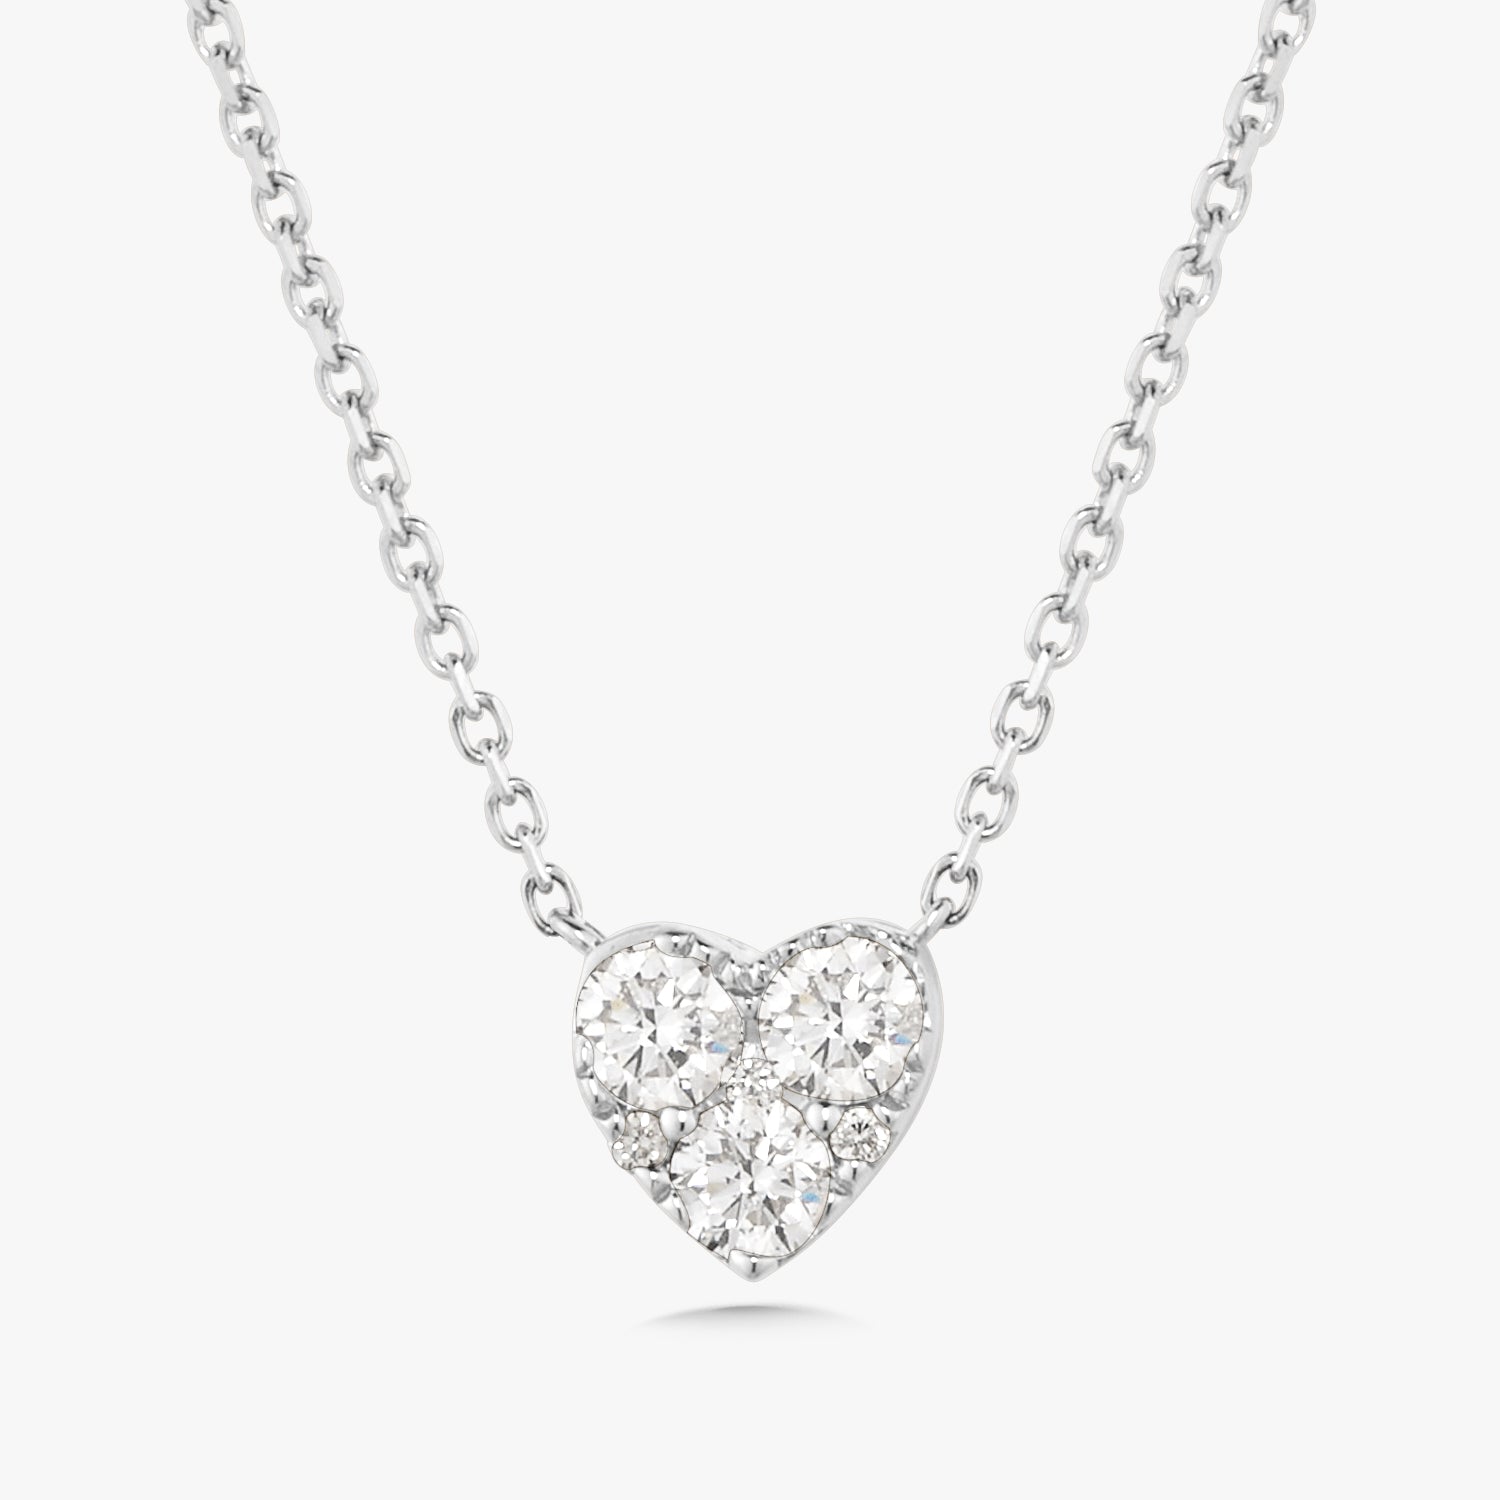 Sparkling Freehand Heart Pendant Necklace | Sterling silver | Pandora US